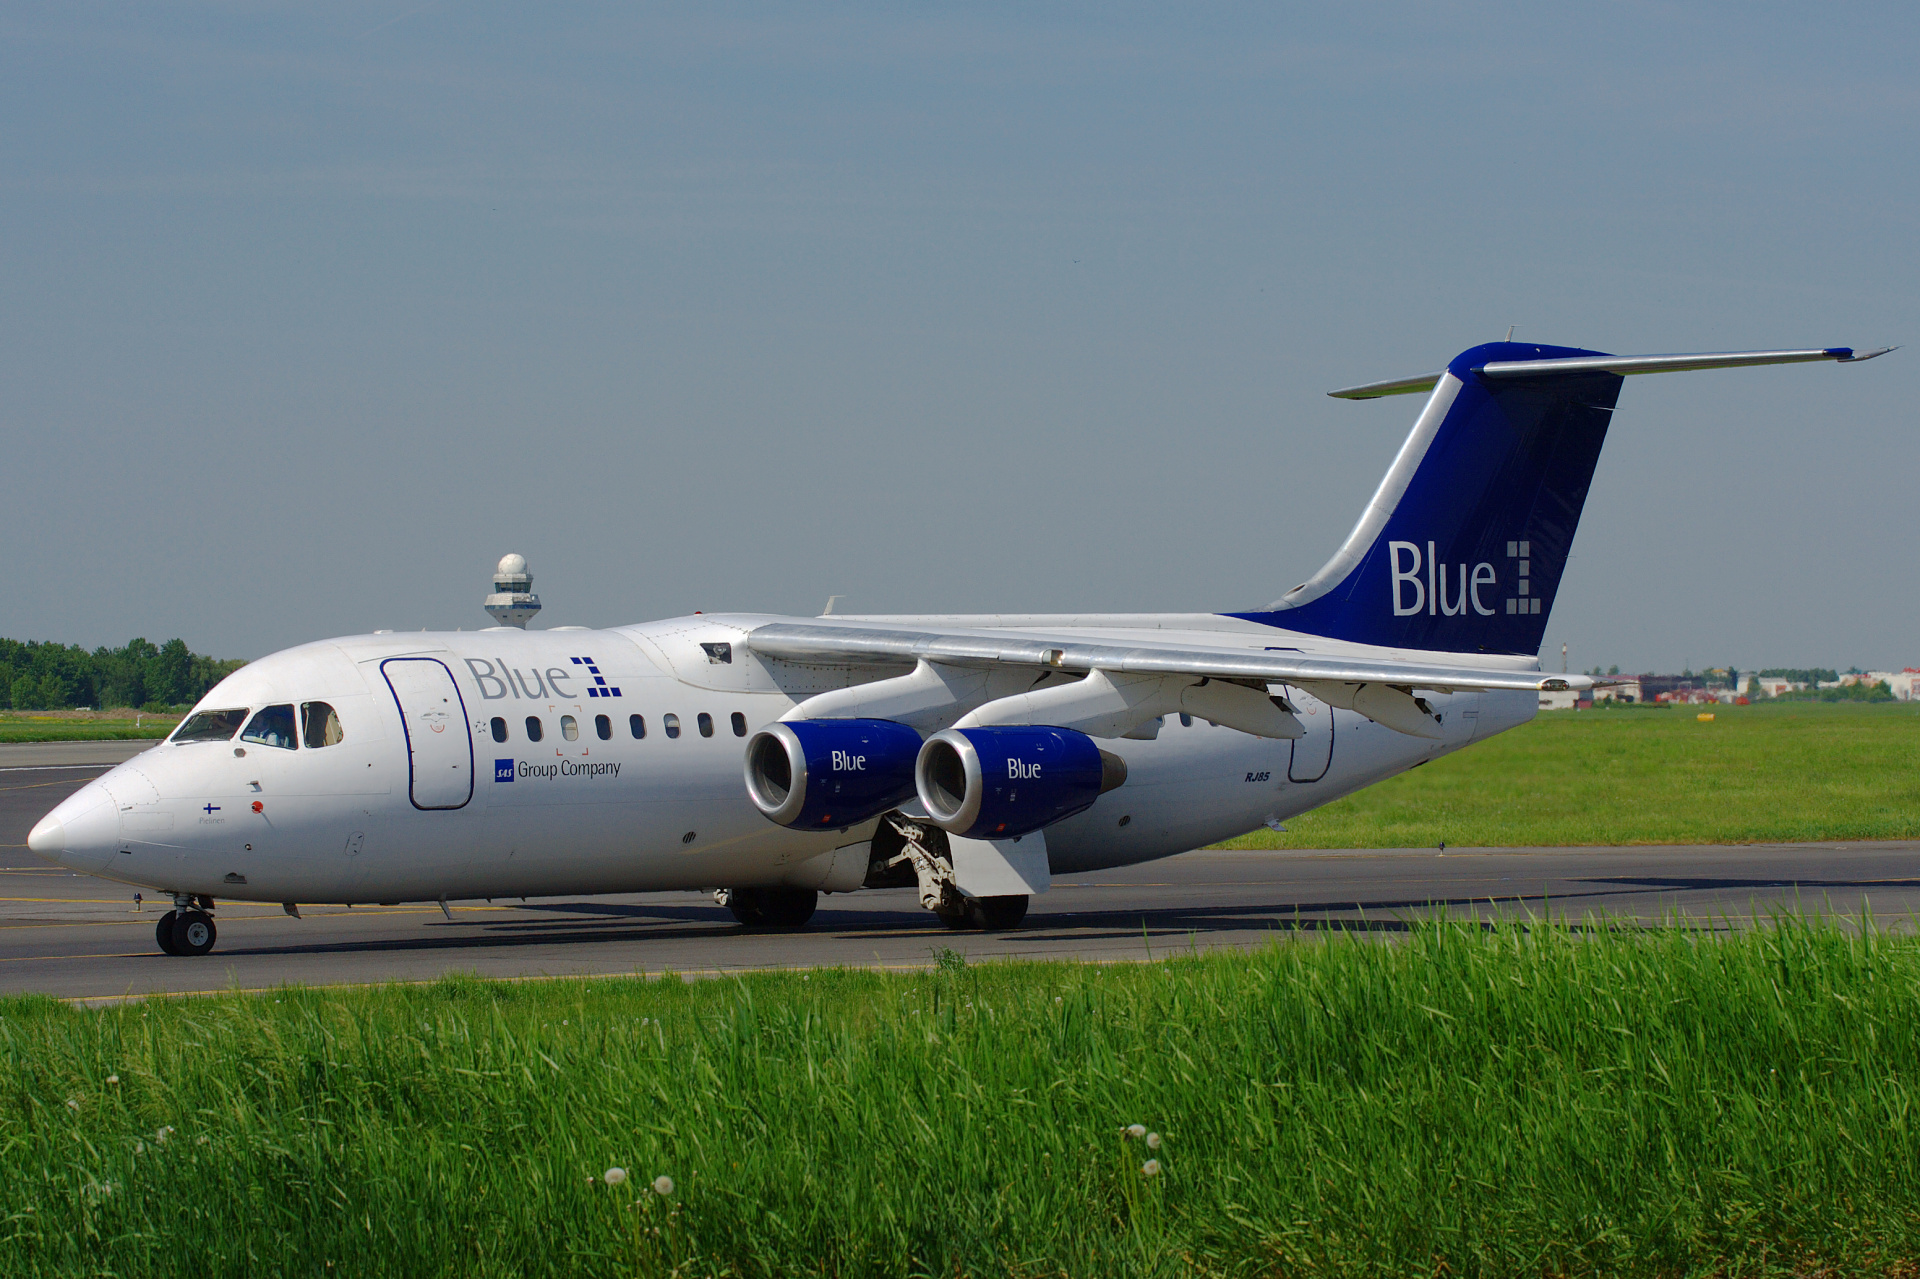 OH-SAx, Blue1 (Aircraft » EPWA Spotting » BAe 146 and revisions » Avro RJ85)